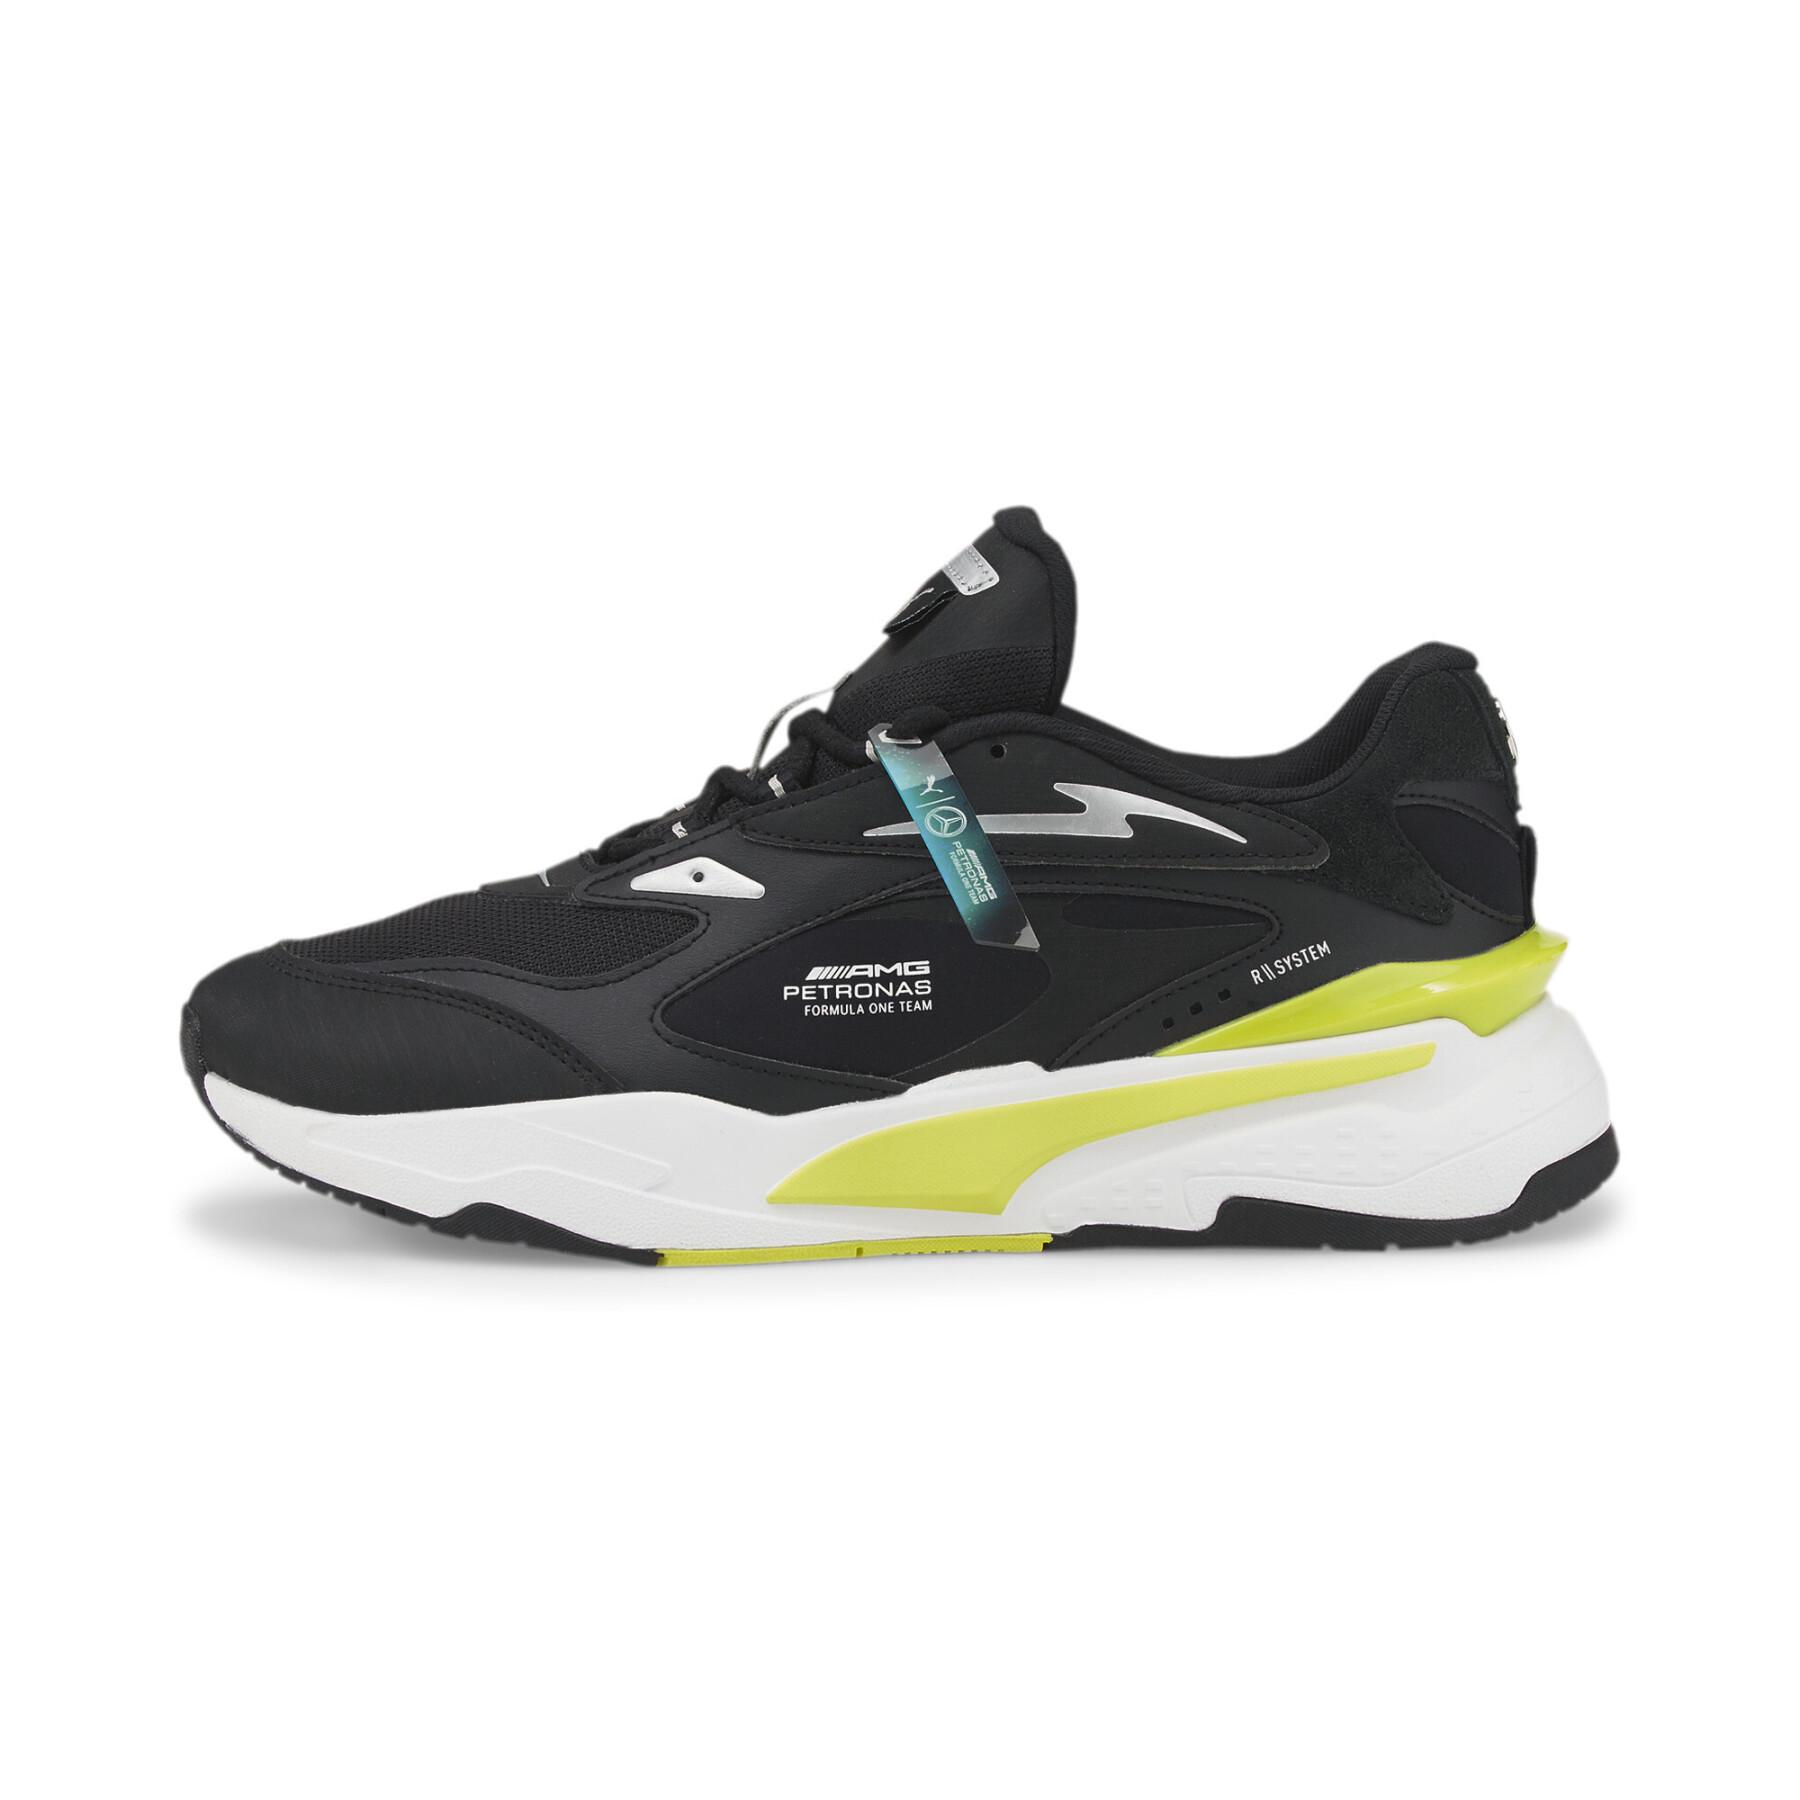 Sneakers Puma Bmw Mms Rs-Fast - Puma - Sneakers Men - Lifestyle